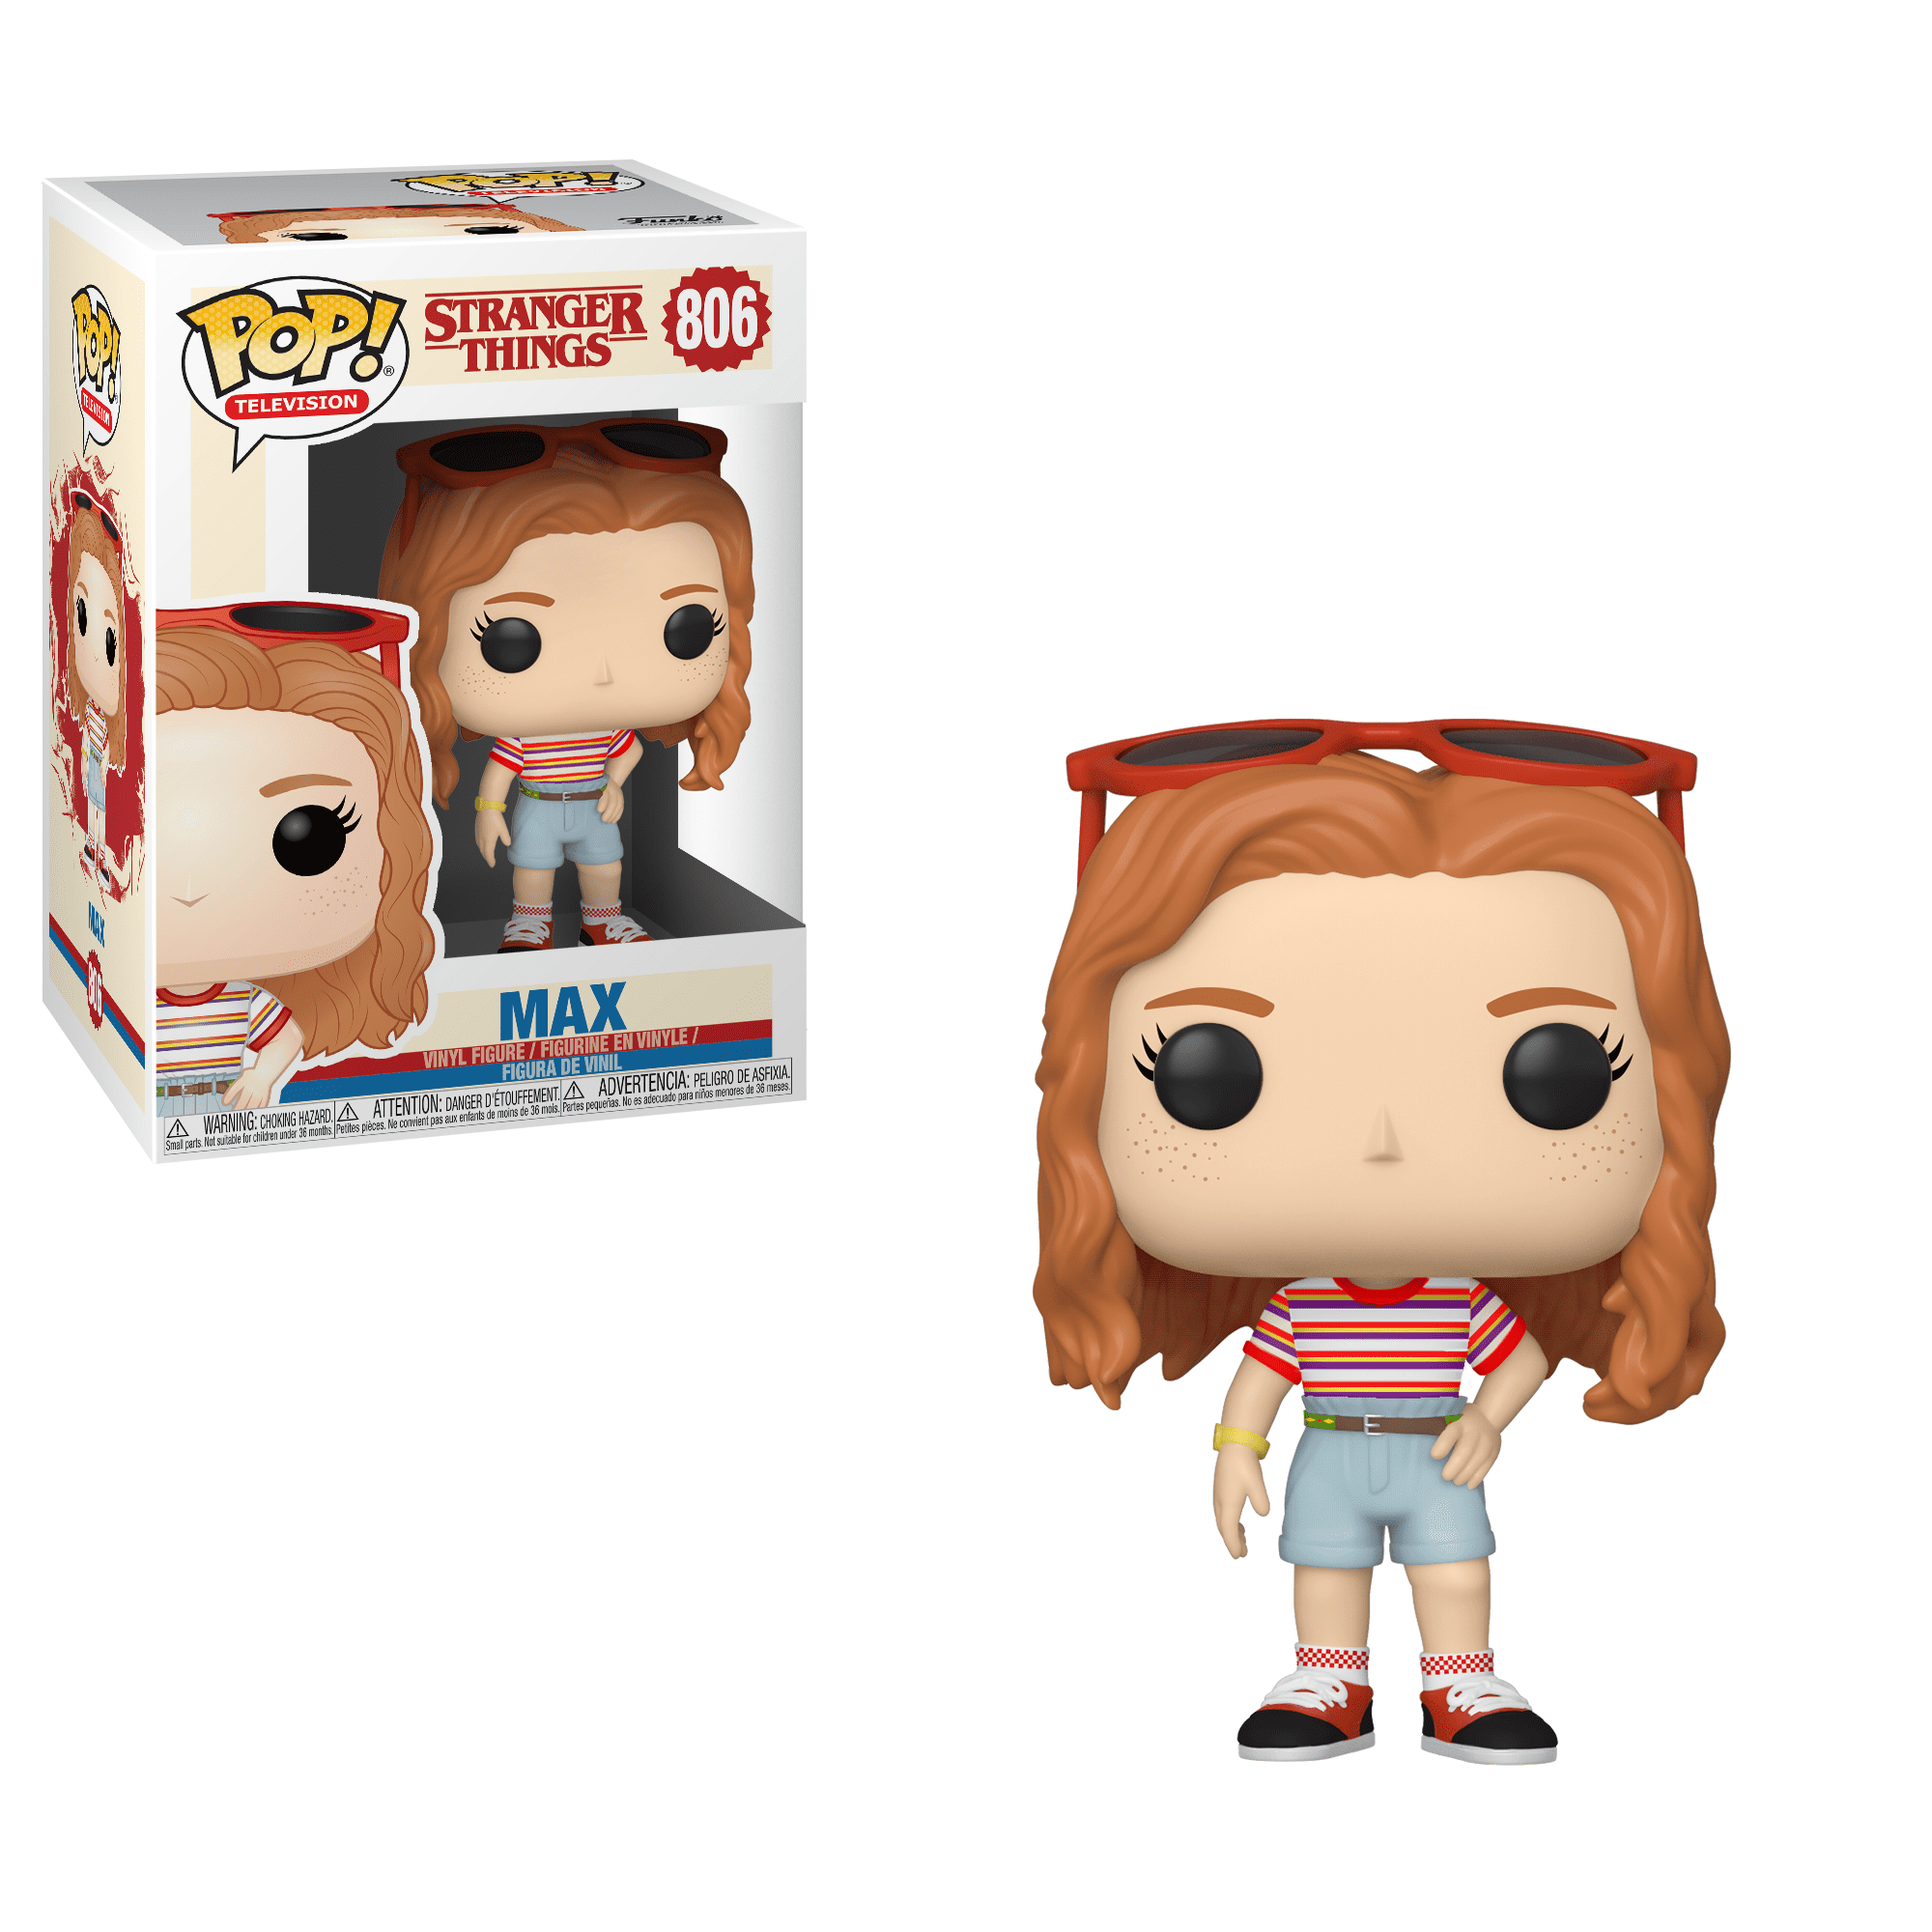 FIGURINE FUNKO POP STRANGER THINGS MAX MALL OUTFIT 